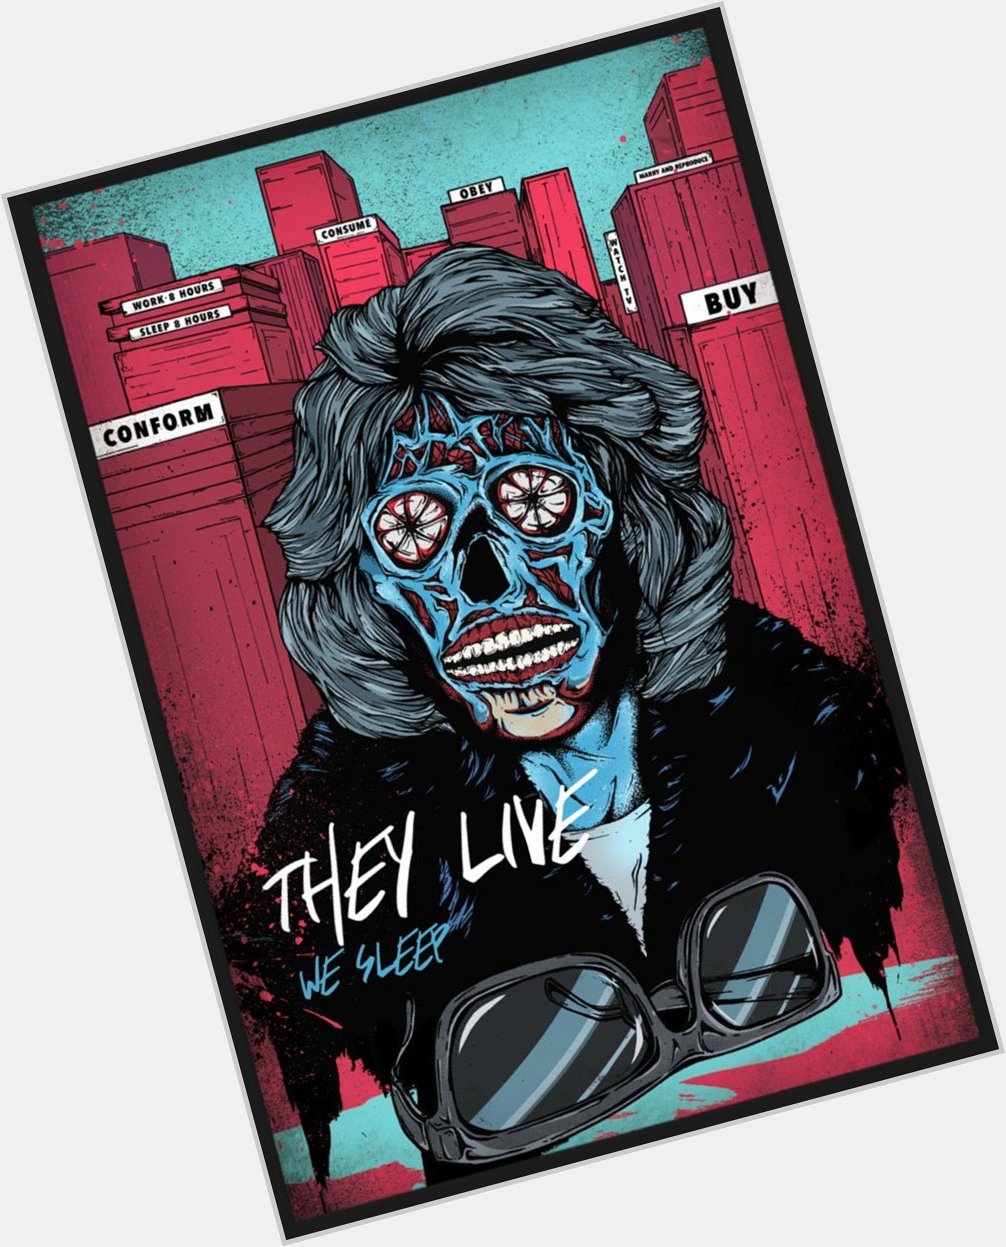 Happy birthday to Meg Foster star of they live (1988) 